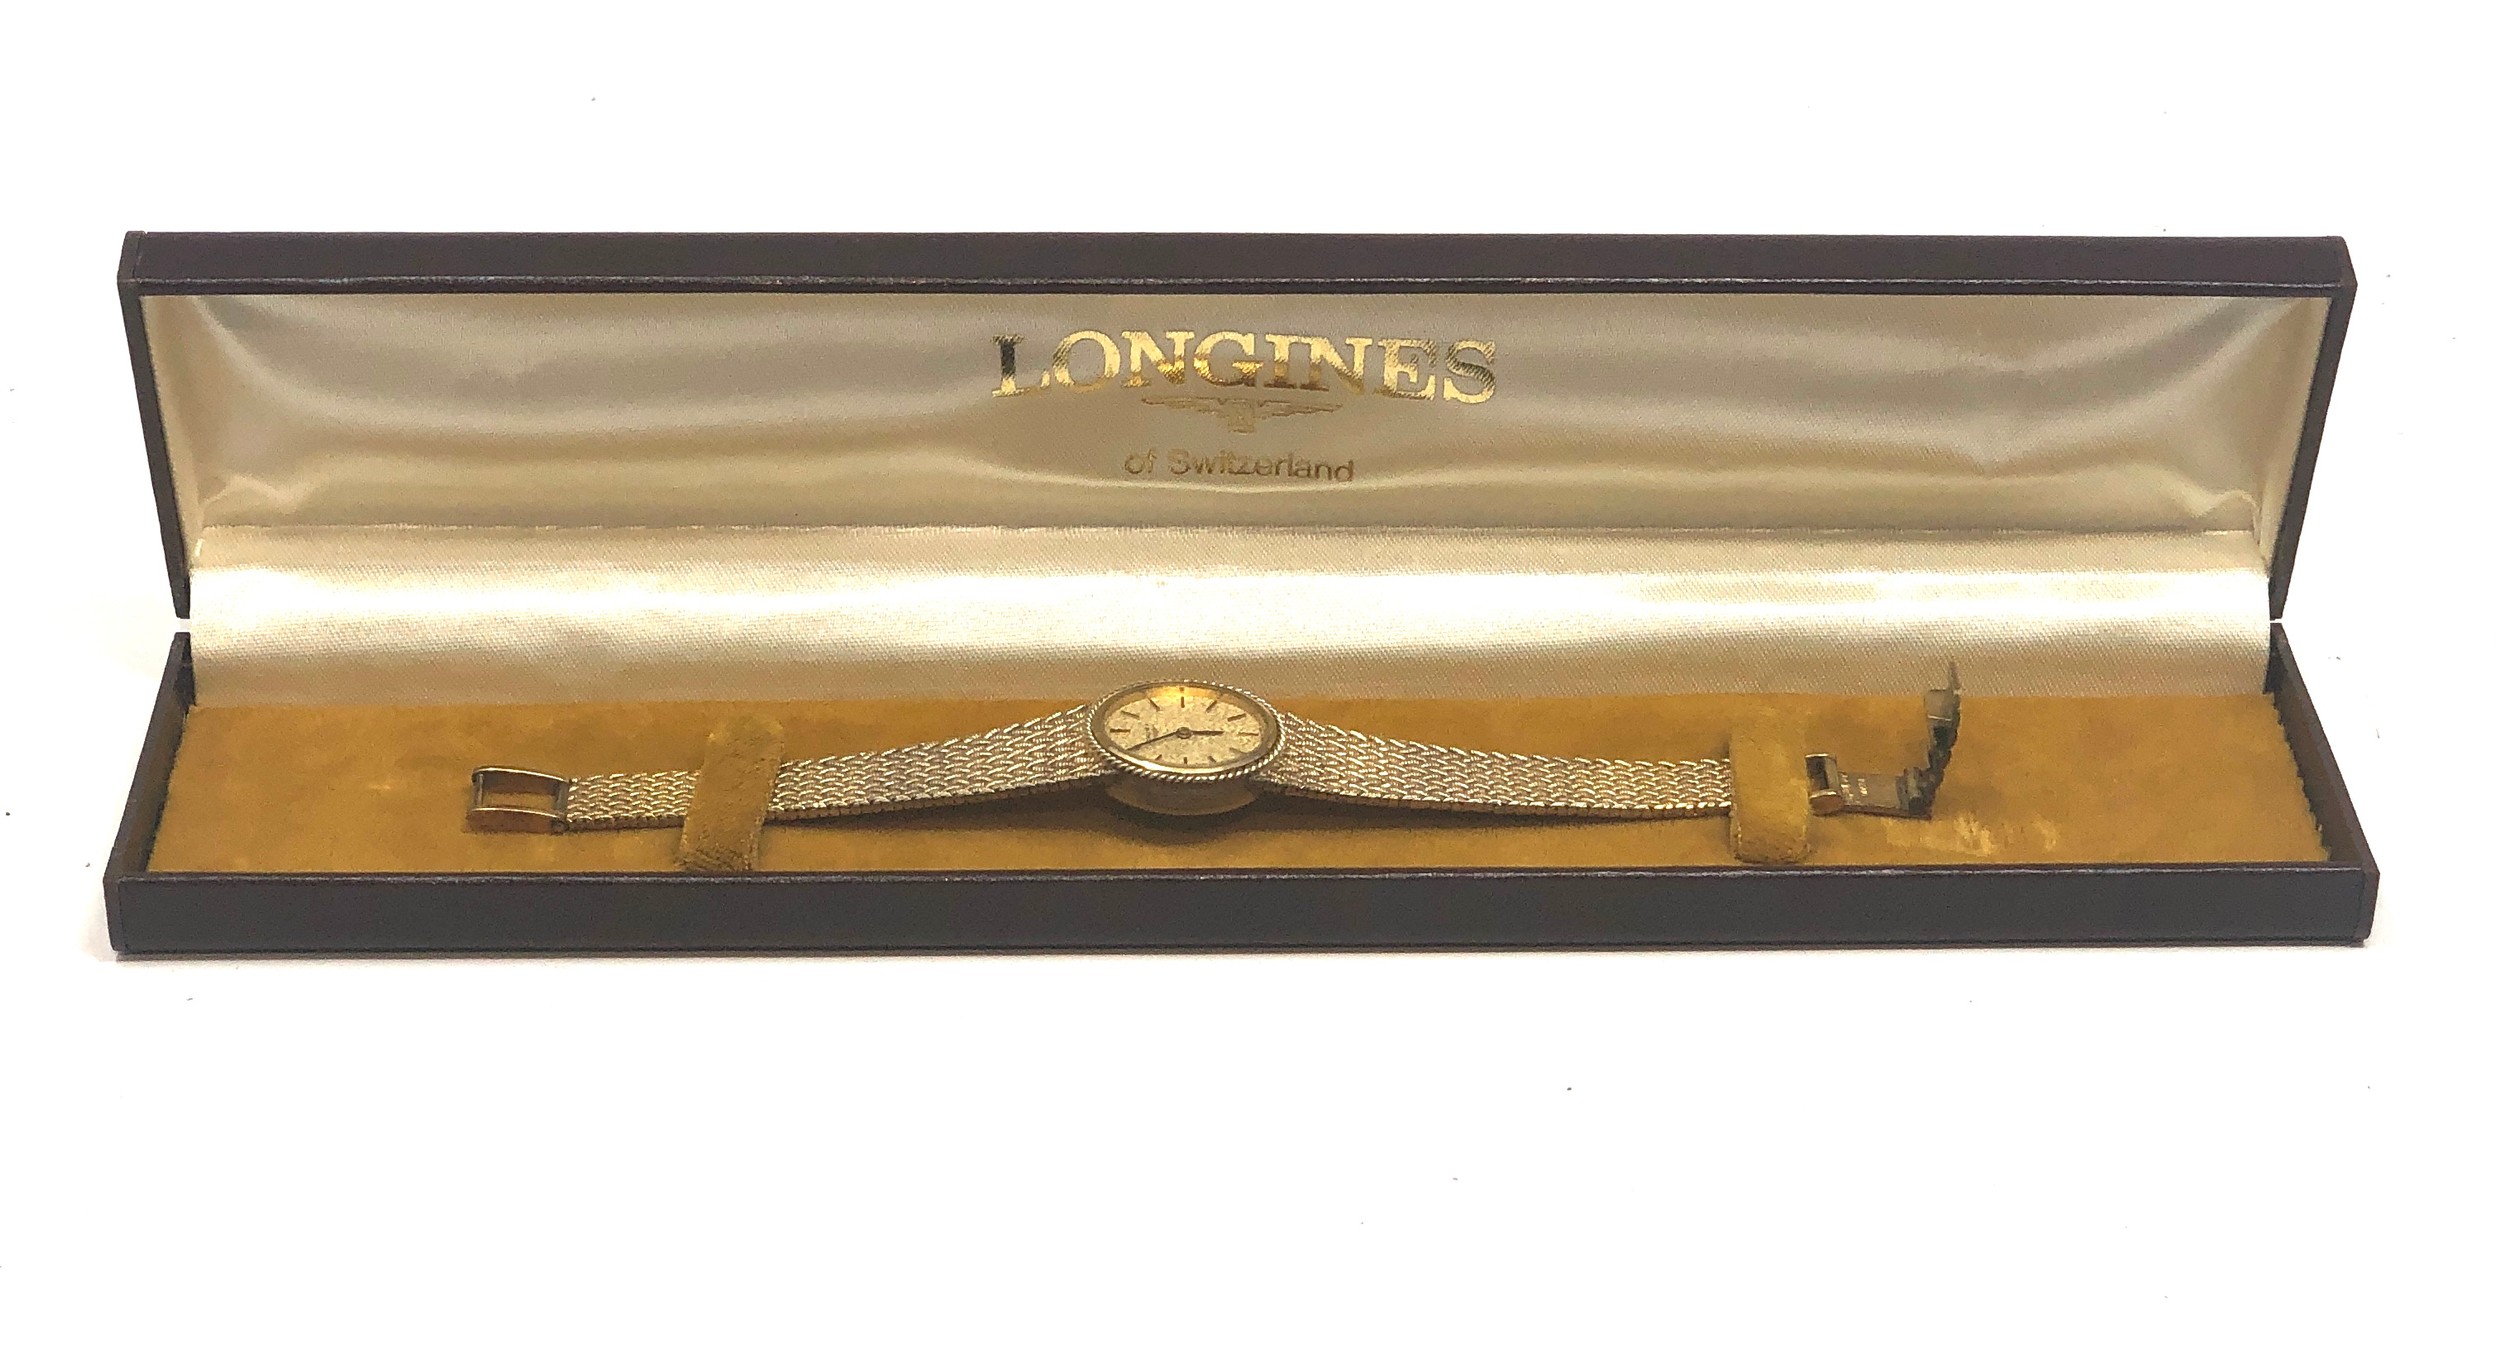 Boxed ladies silver longines wristwatch stainless steel back hand winding working order